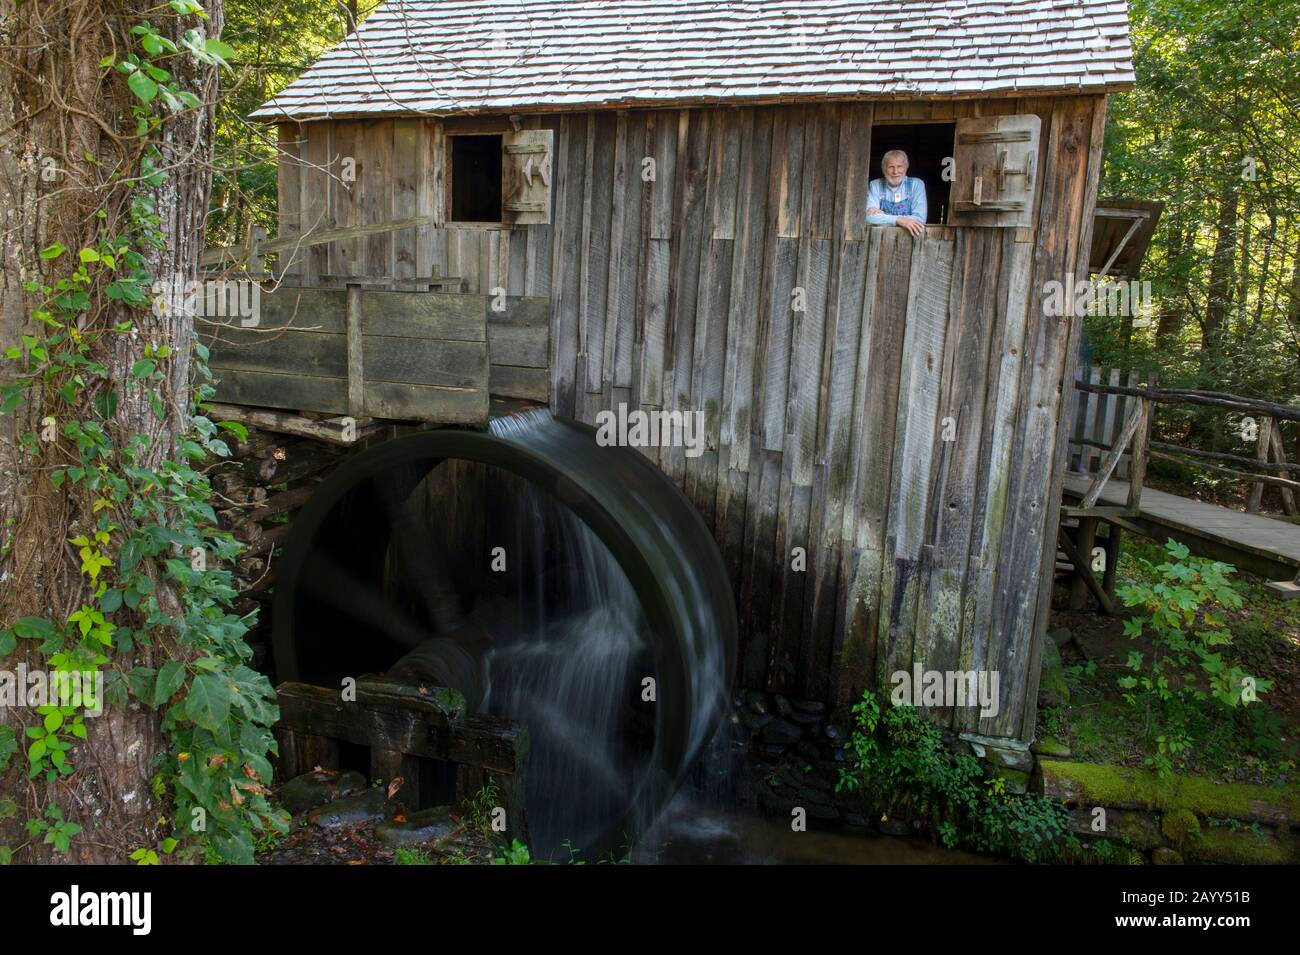 The John P. Cable Grist Mill in Cades Cove, Great Smoky Mountains National Park in Tennessee, USA, was built in the early 1870s. Stock Photo